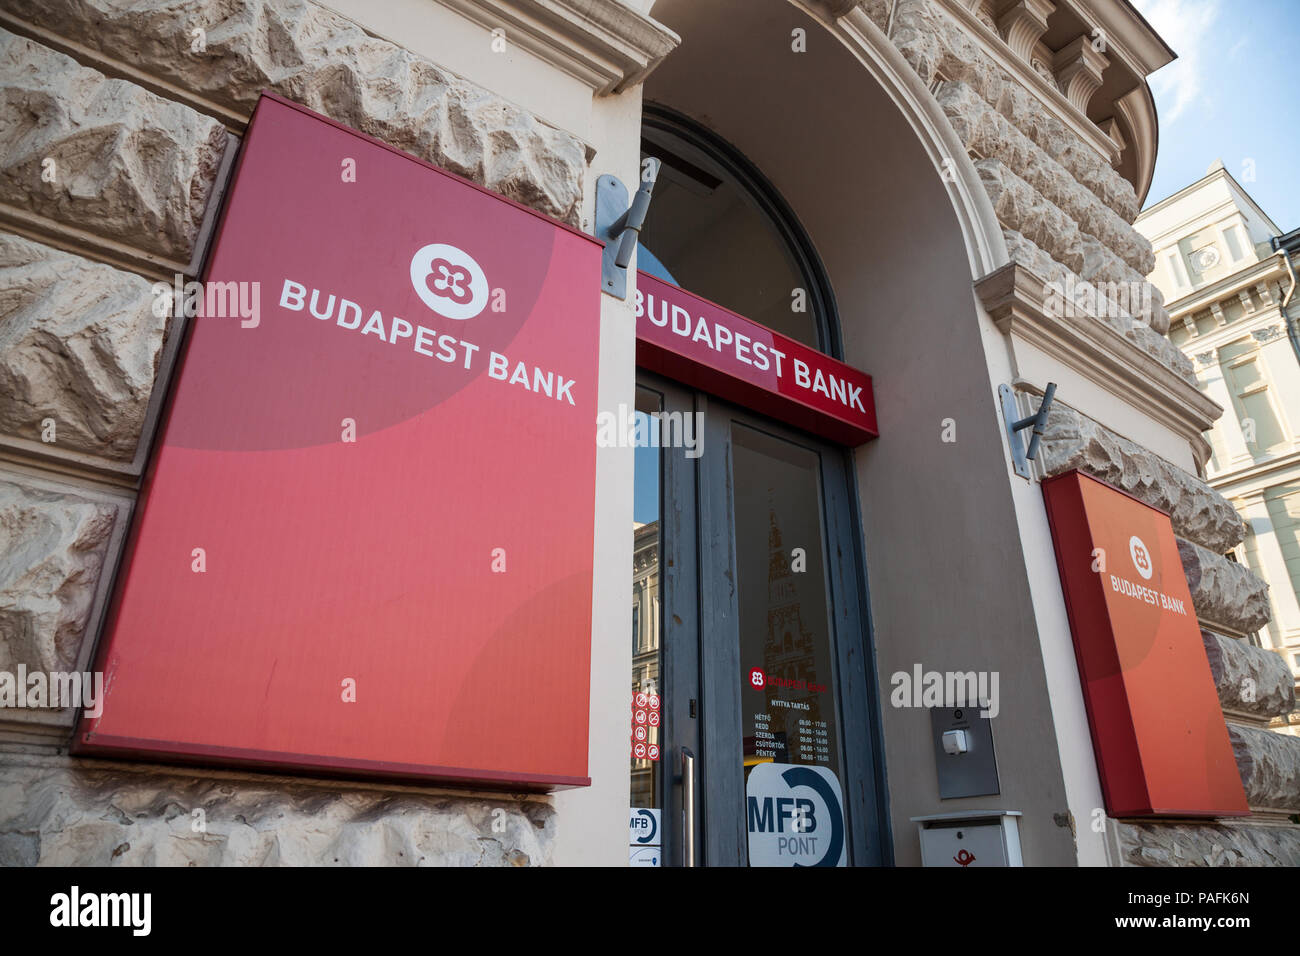 SZEGED, HUNGARY - JULY 3, 2018: Budapest Bank Logo on their main office afor Szeged Szeged. Budapest Bank is a Hungarian Commercial Bank, one of the b Stock Photo